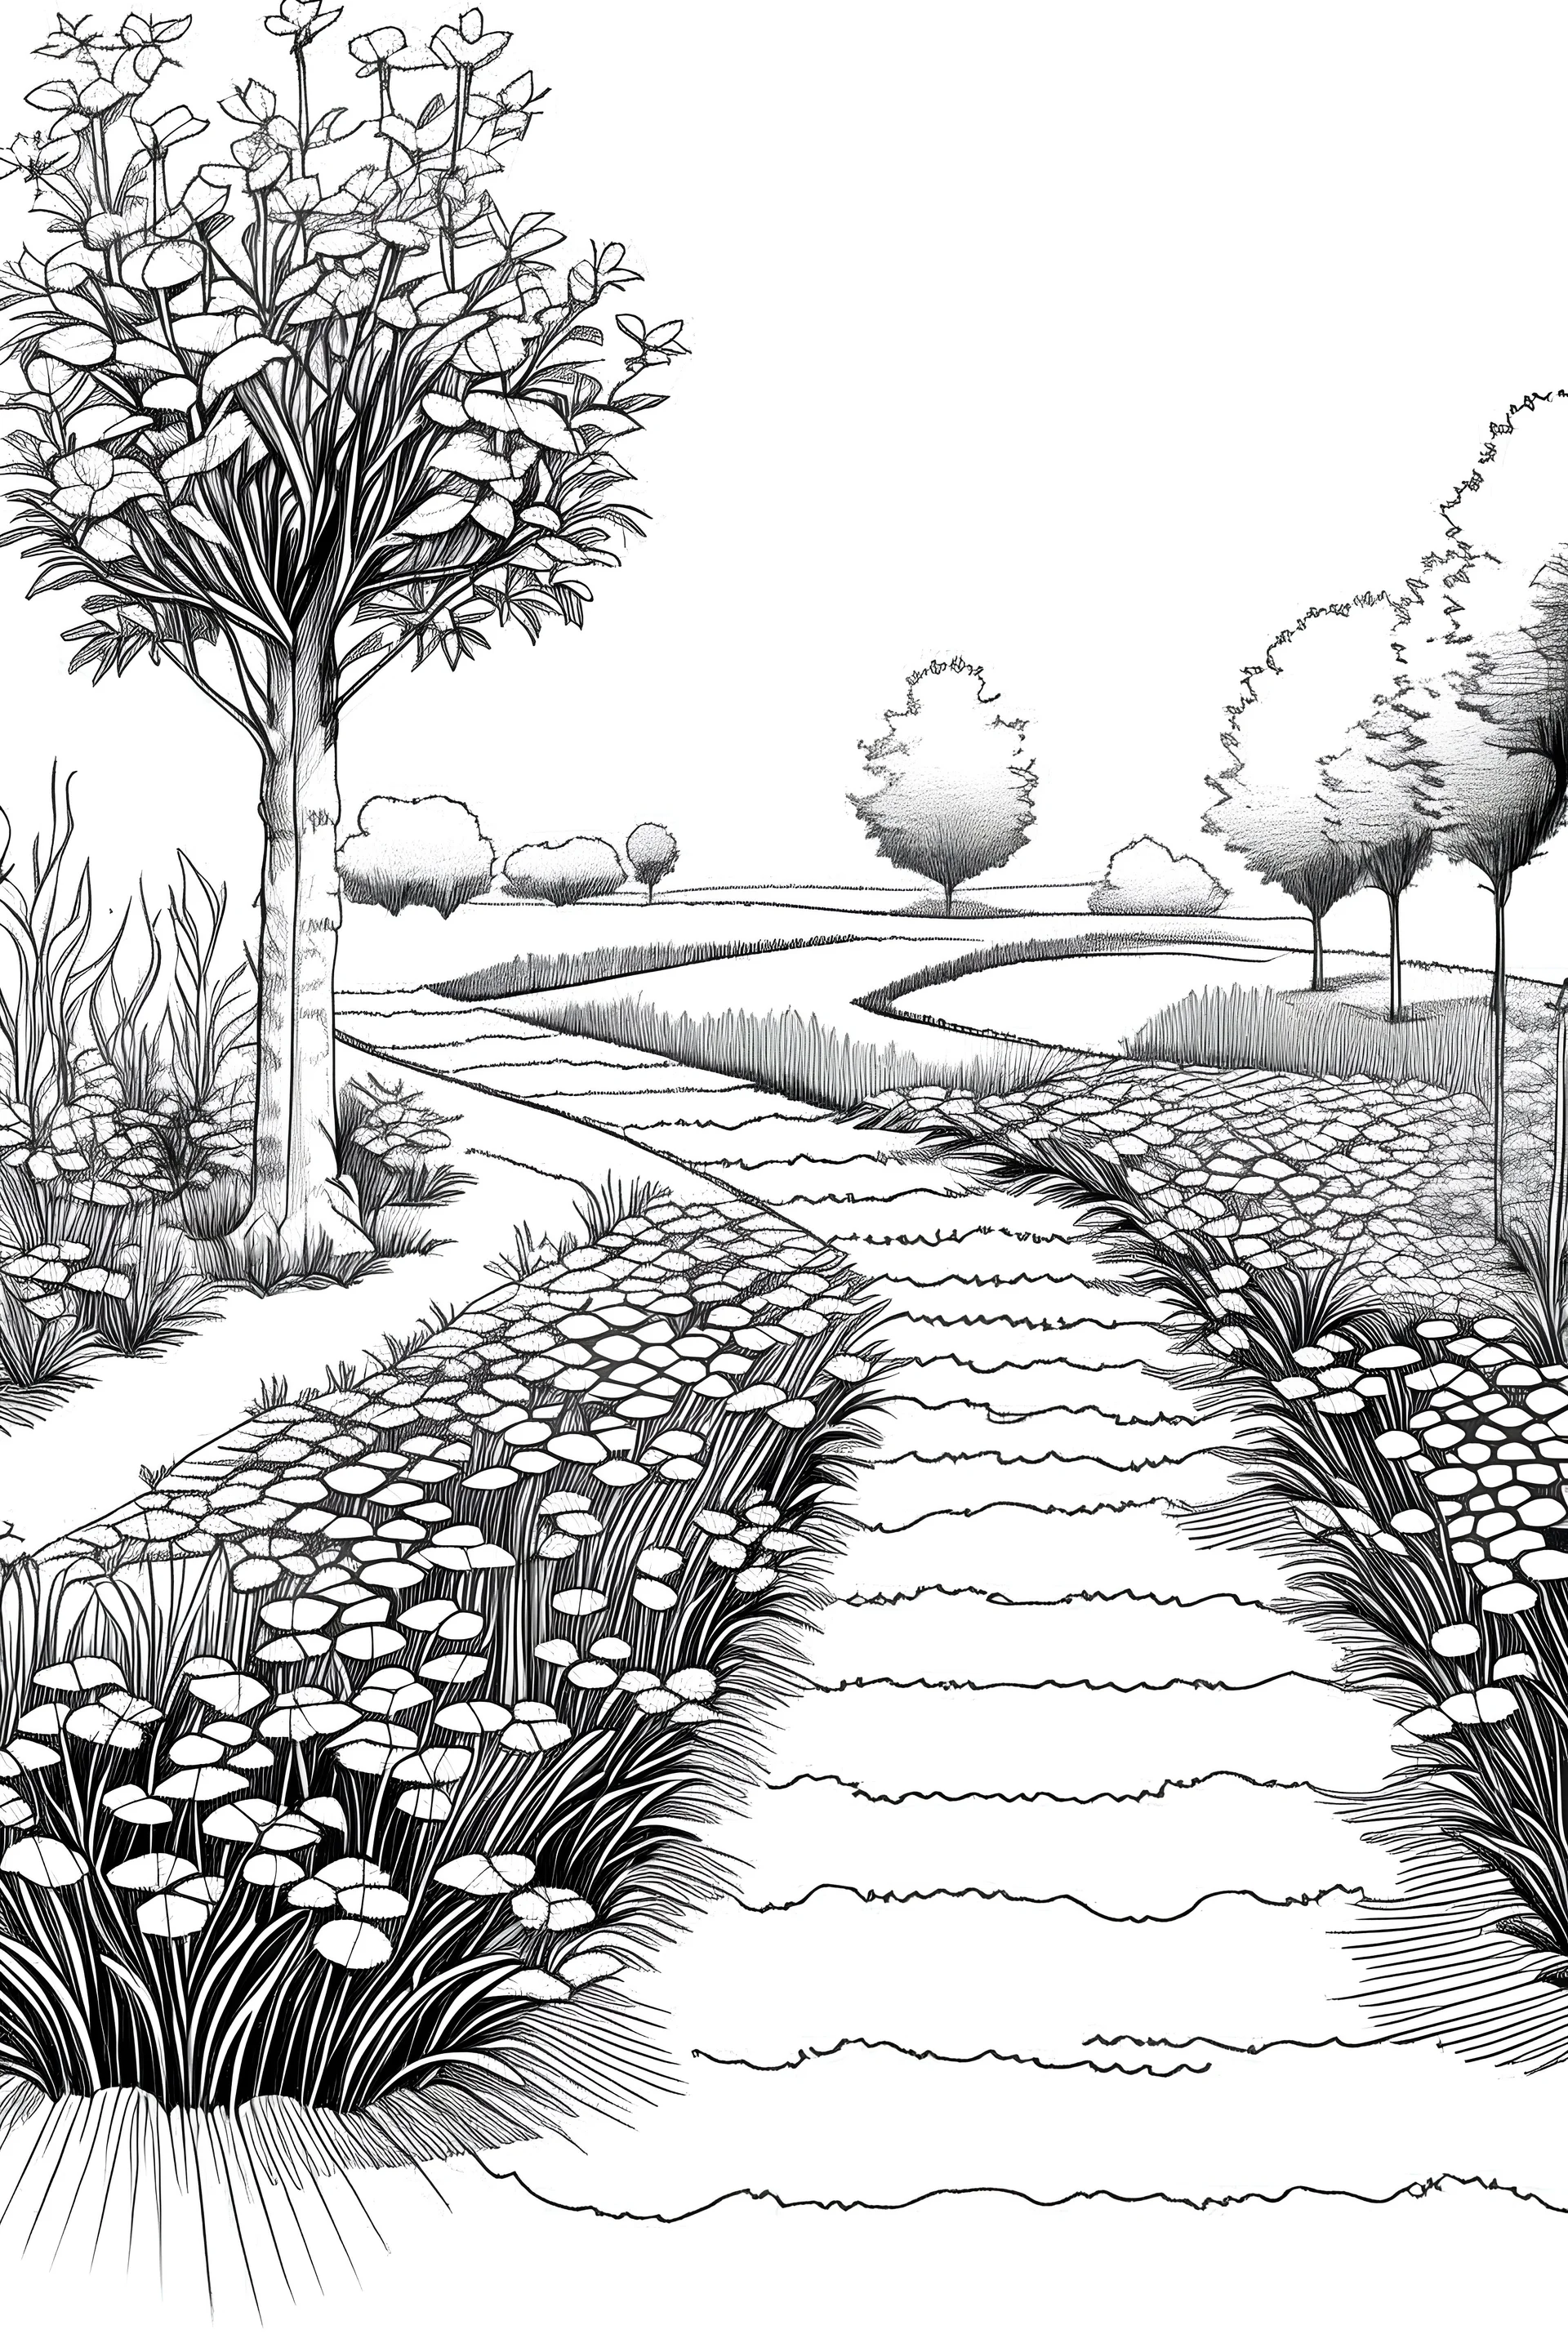 How to draw garden scenery.Step by step(easy draw) - YouTube